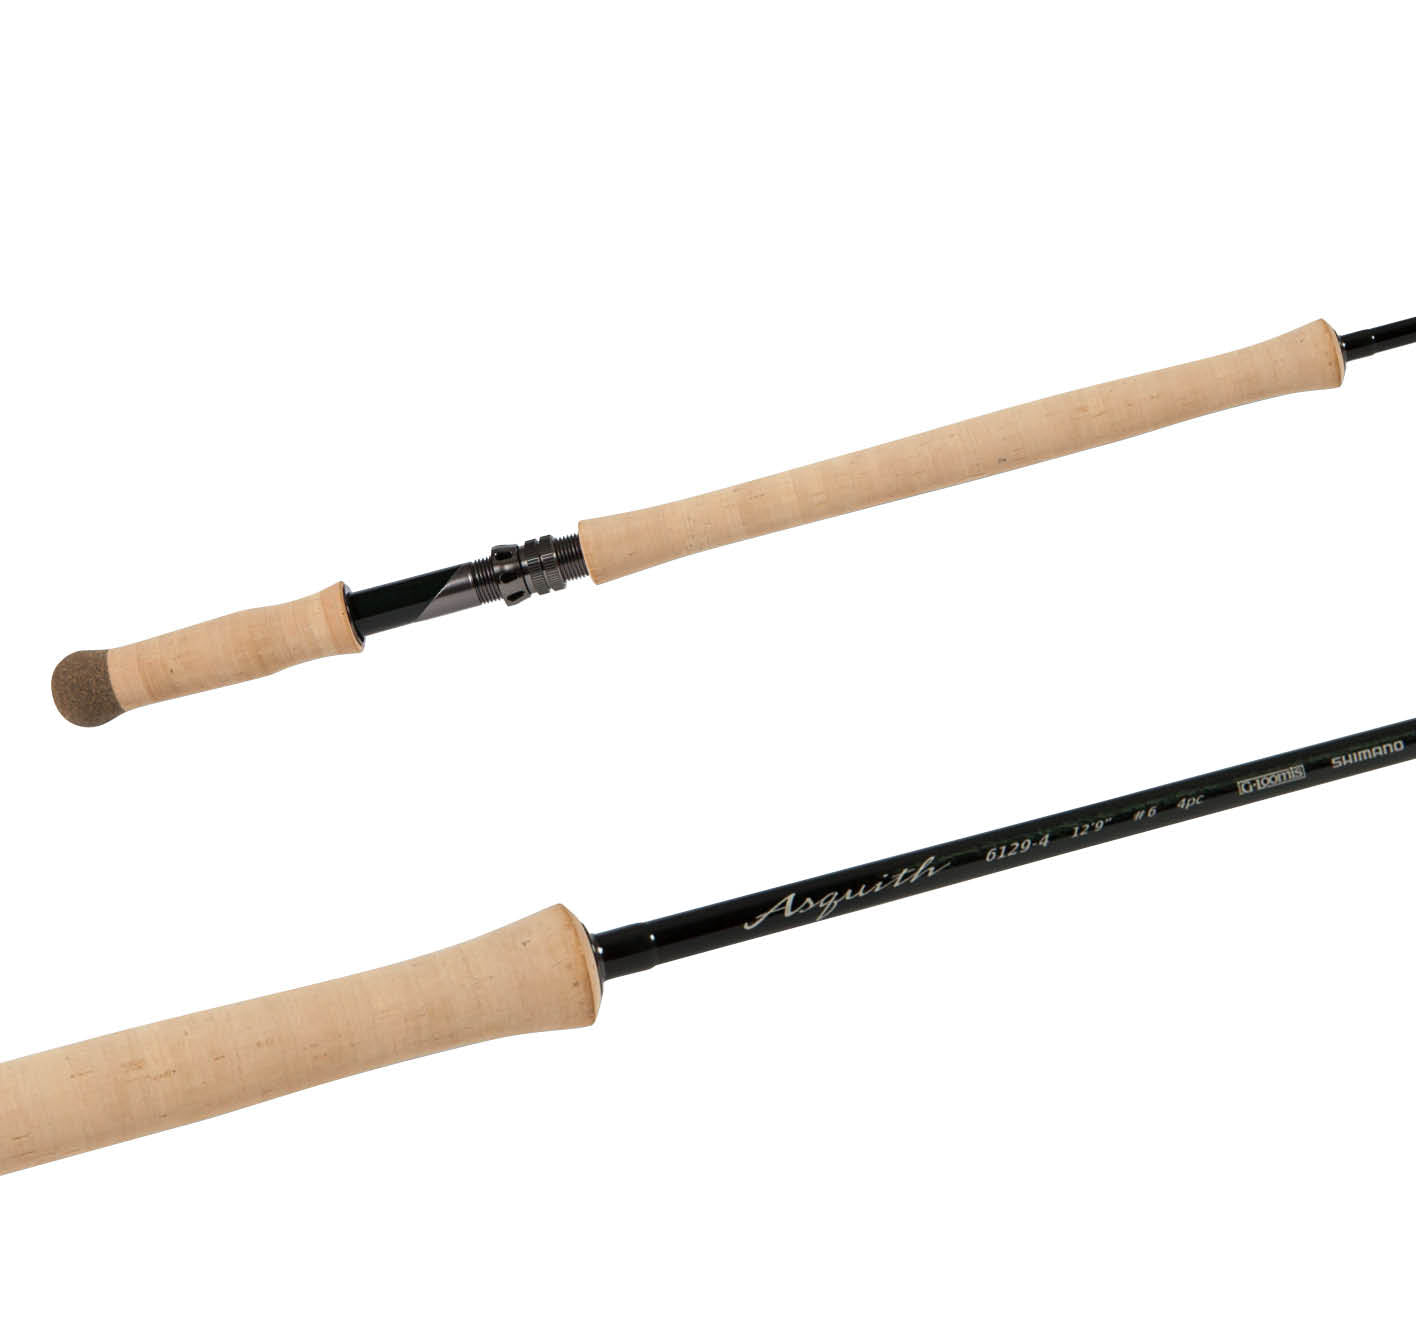 G. Loomis Asquith Spey Fly Rods